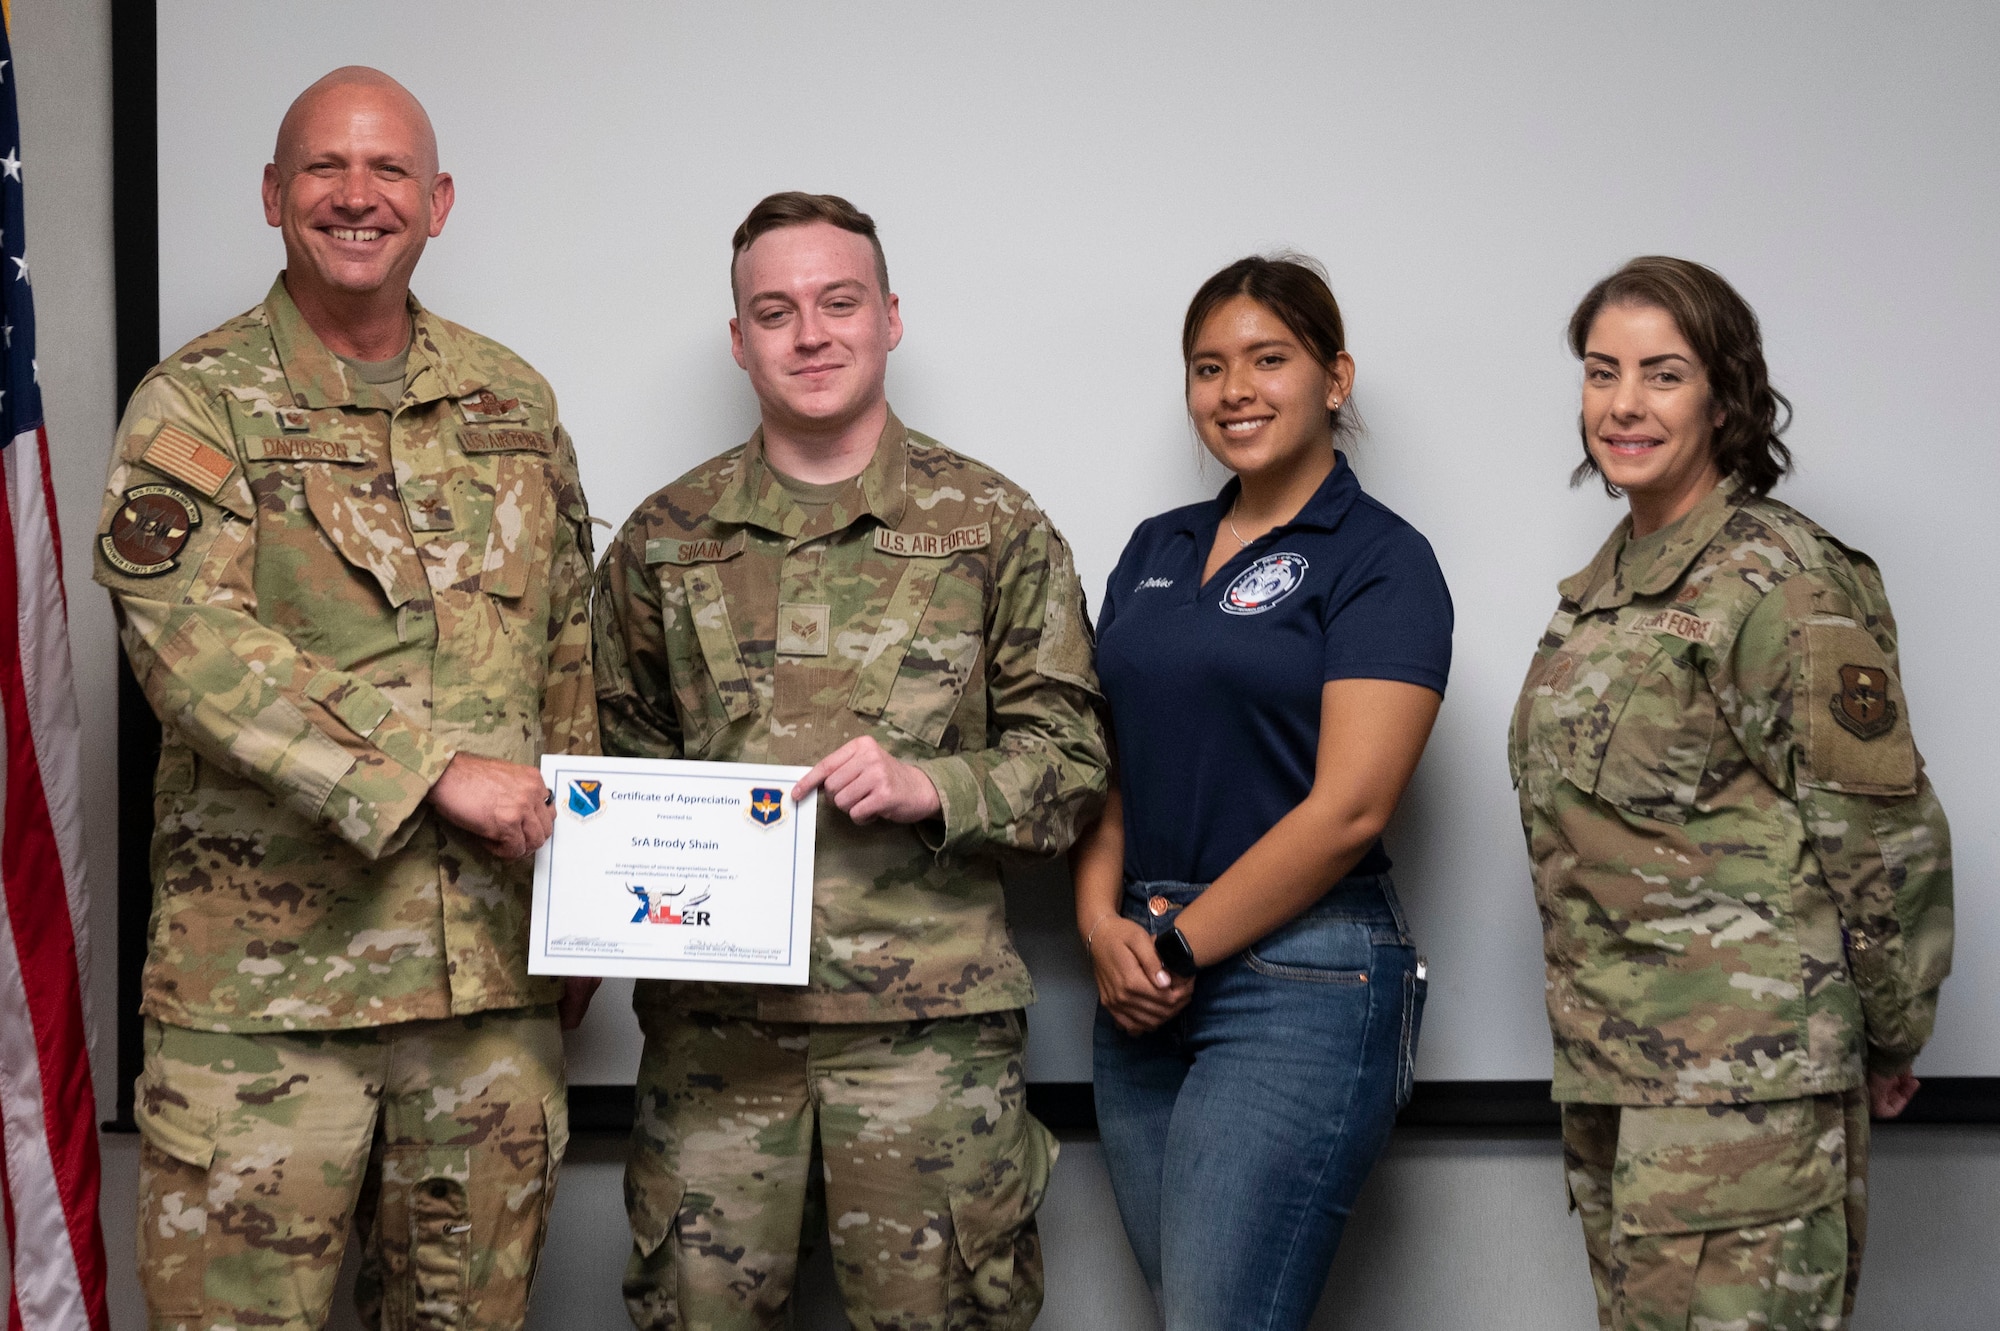 Carla Robles, (middle right), Del Rio High School Junior Reserve Officer’s Training Corps cadet, poses for a photo with Col. Kevin Davidson (left), 47th Flying Training Wing commander, and Chief Master Sgt. Christina Wolfe (right), 47th Operations Group senior enlisted leader, and Weekly Xler award recipient Senior Airman Brody Shain, 47th Healthcare Operations Squadron medical logistics technician, at Laughlin Air Force Base, Texas, June 7, 2023. Robles visited Laughlin to gain insight into strategic decision-making, personnel management, and the execution of critical missions under the guidance of Col. Kevin Davidson, 47th Flying Training Wing commander. (U.S. Air Force photo by Airman 1st Class Kailee Reynolds)